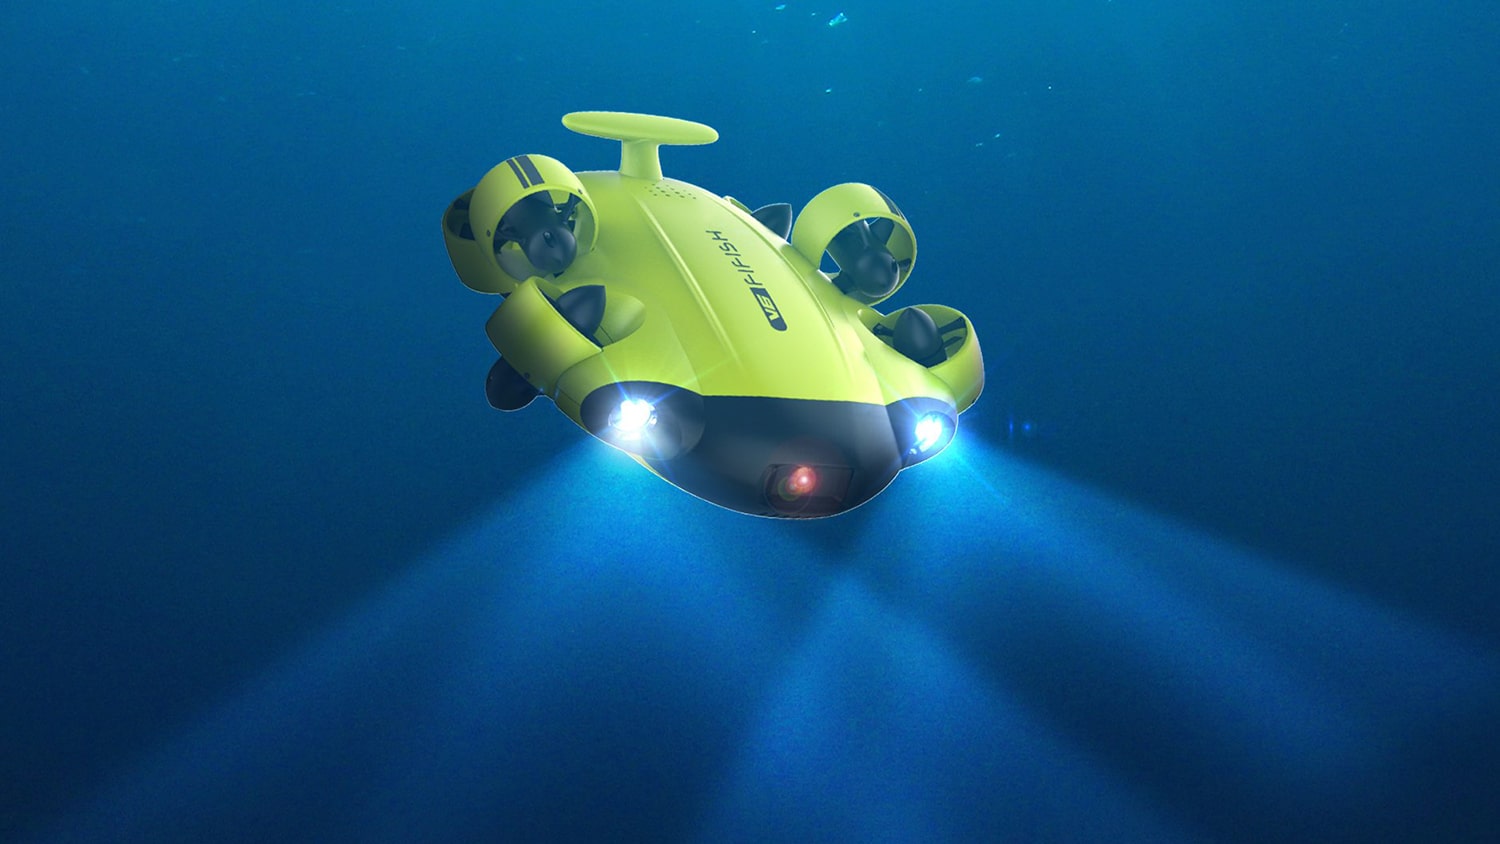 FIFISH V6, an underwater robot to discover the undiscovered.